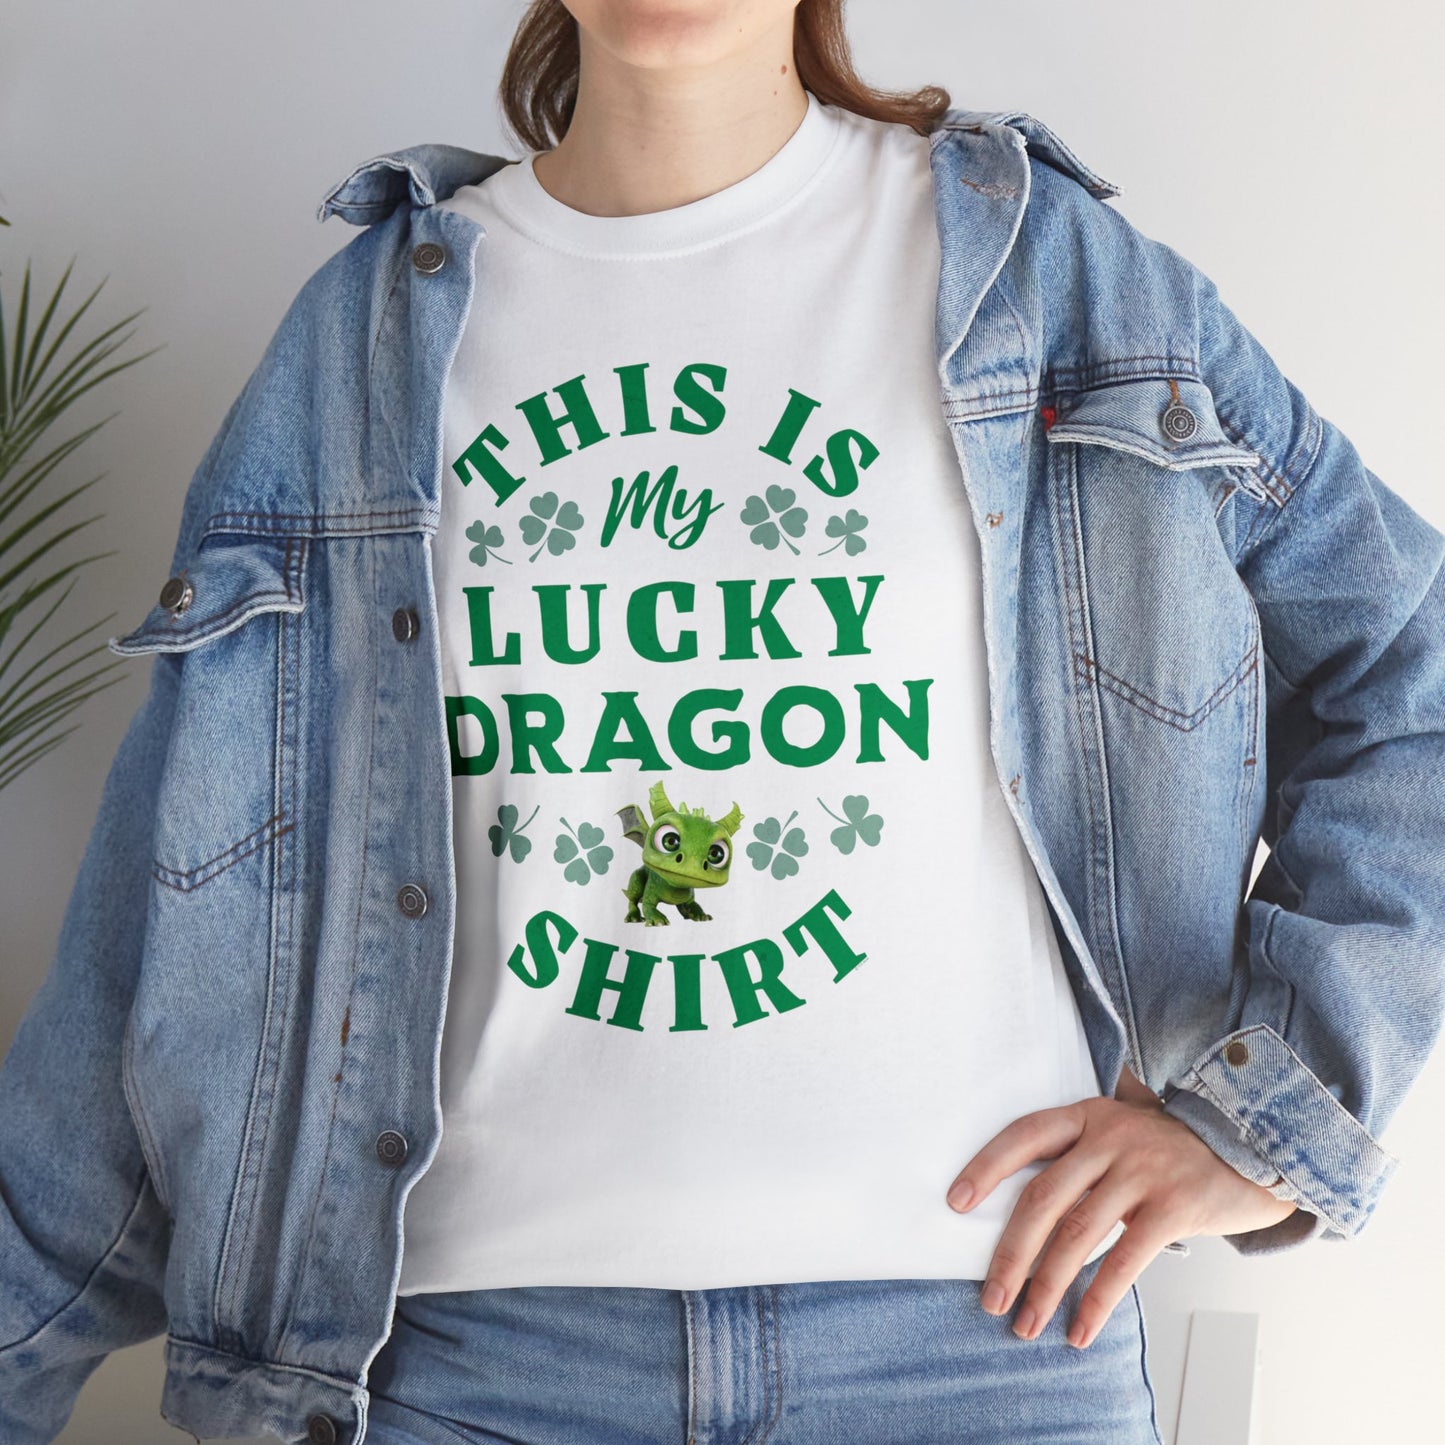 This is my Lucky Dragon Shirt Gaia Saint Patrick's Day Adult Unisex Heavy Cotton Tee